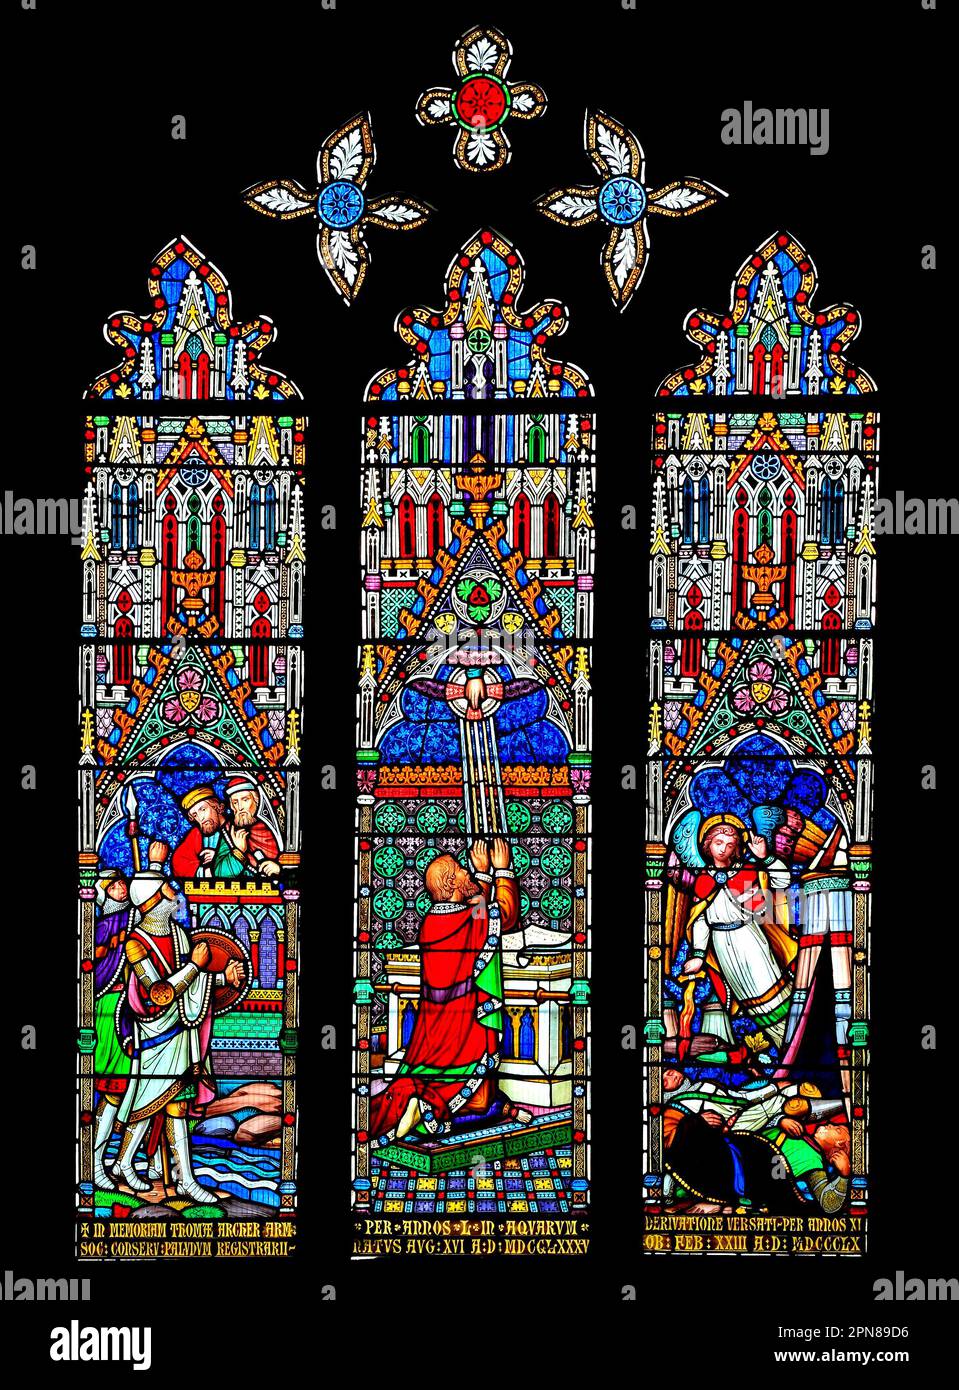 Stained glass window, King Hezekiah and the Assyrians, by William Wailes, mid 19th century, Ely Cathedral, Cambridgeshire, England Stock Photo